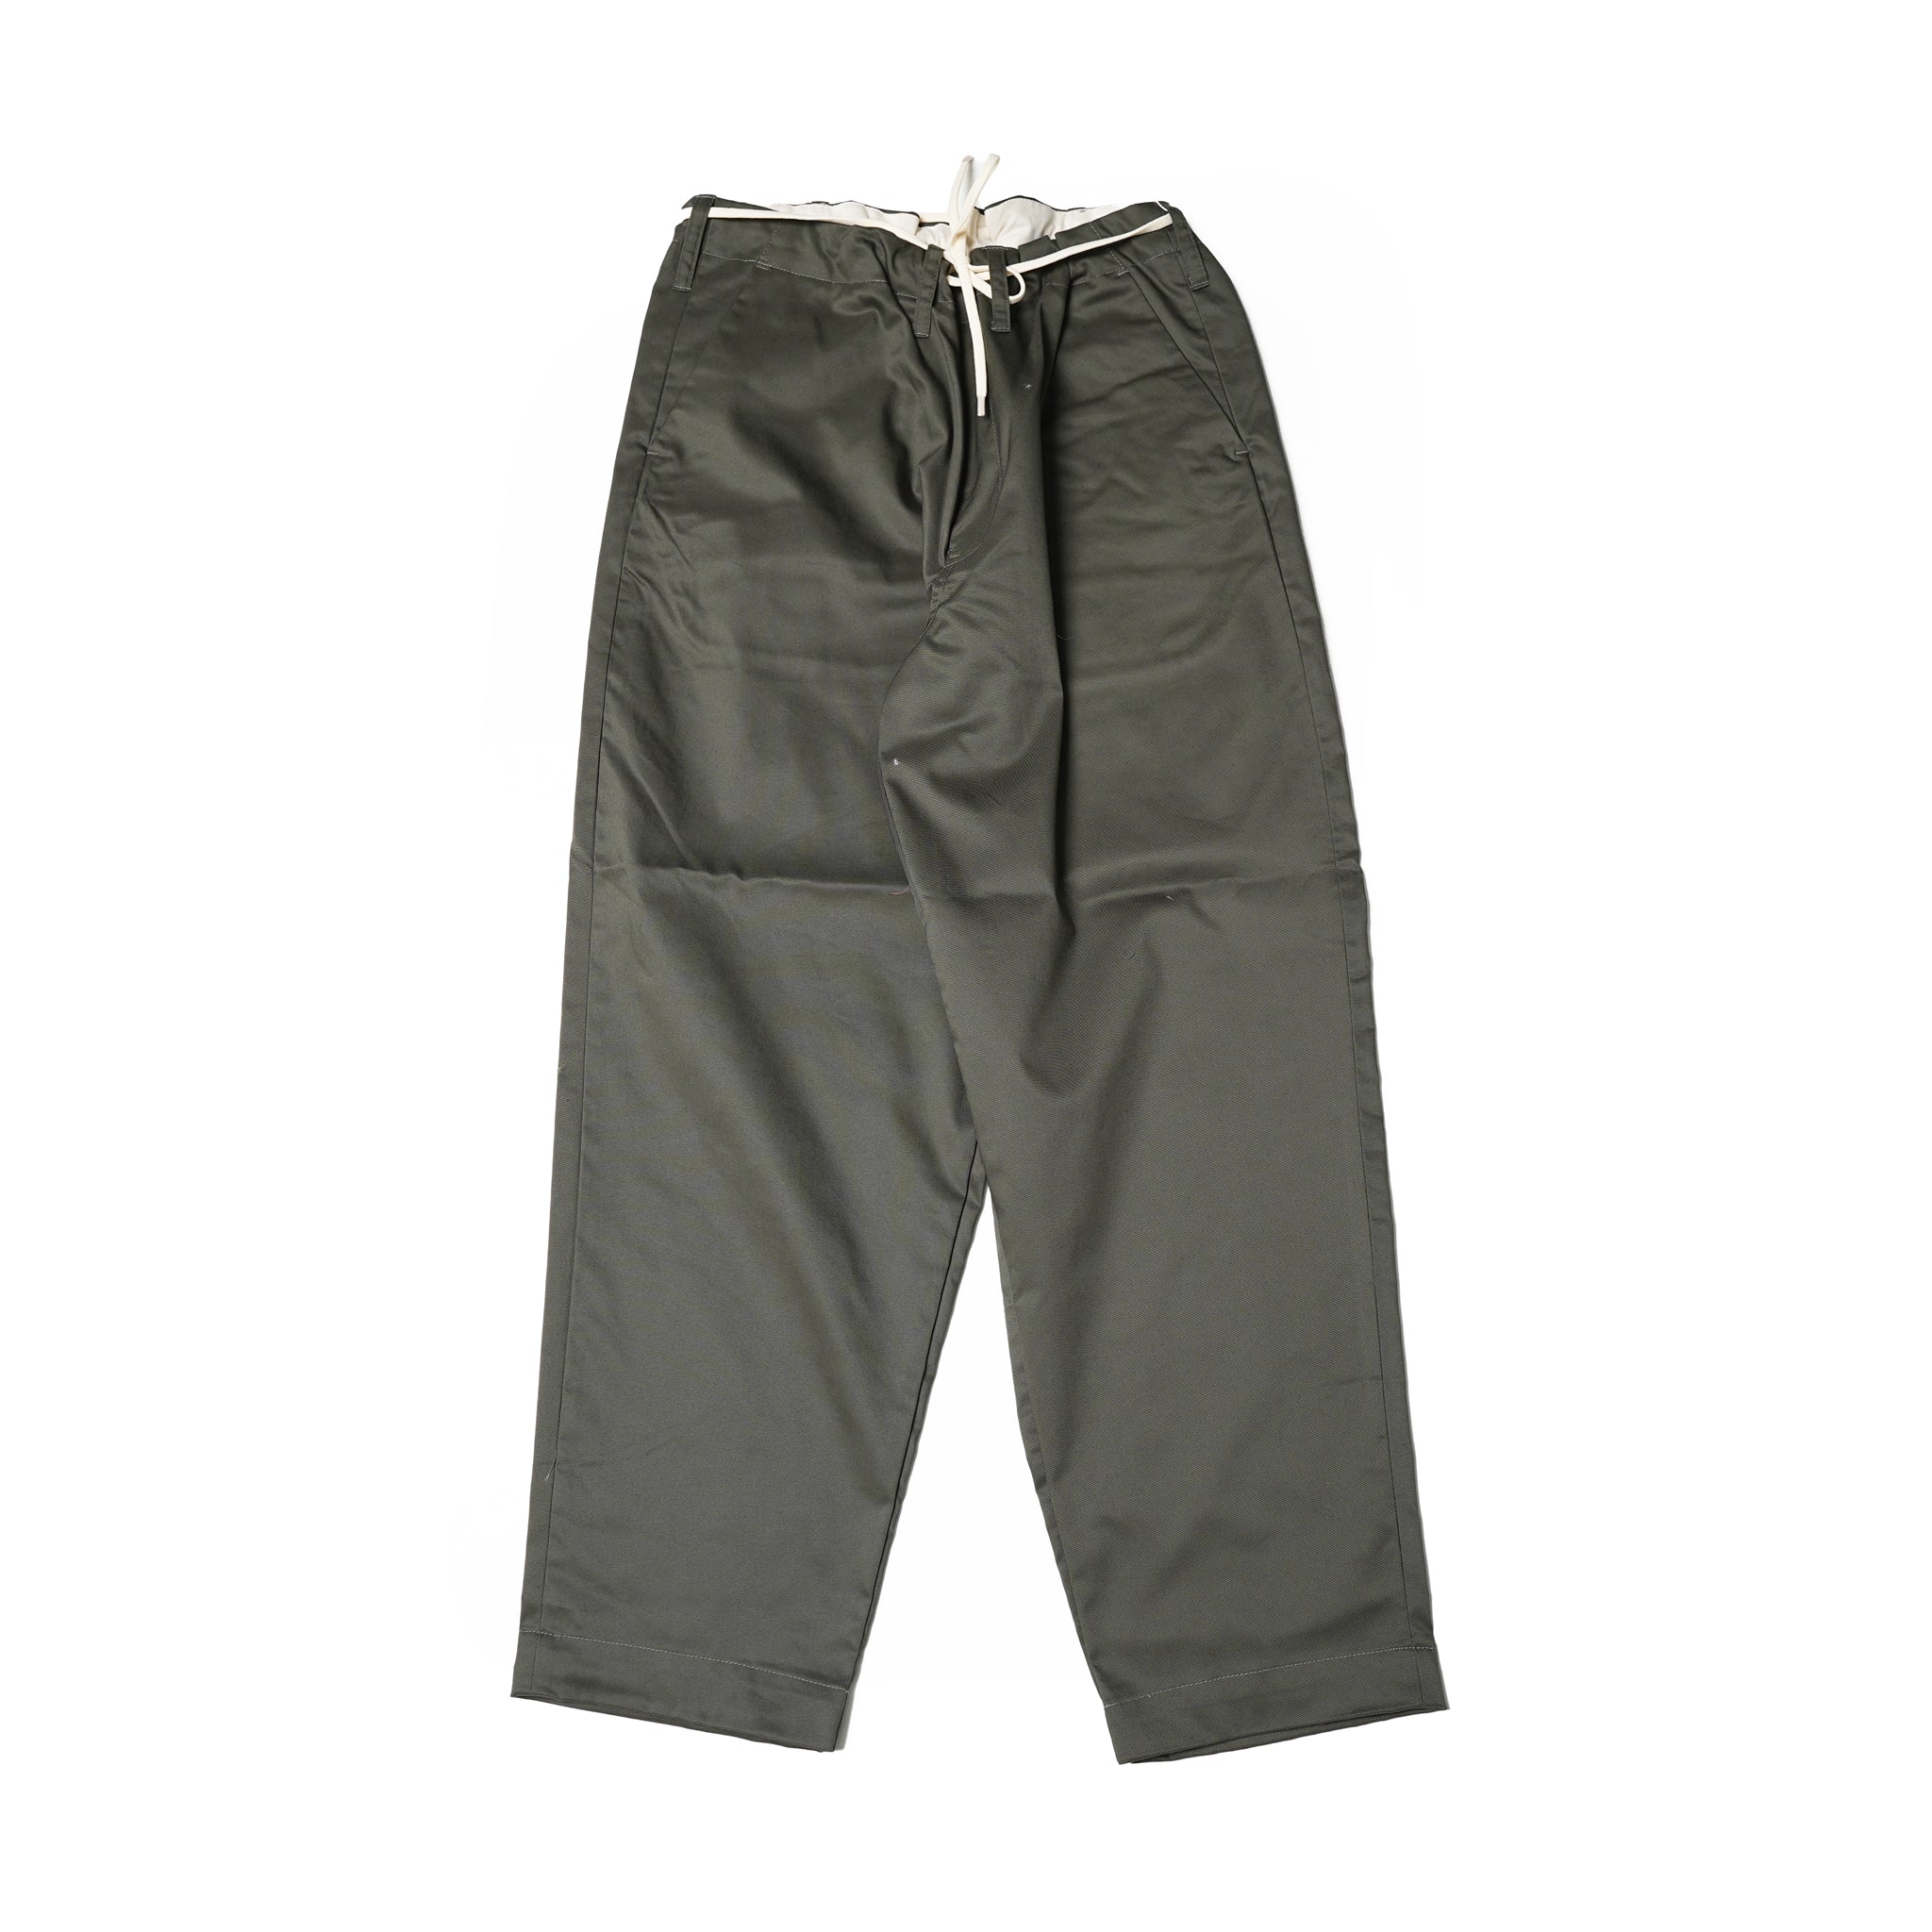 Name: Non-Elastic E-Z Pants Dead Stock Fabric Collection | Color:Olive | Size: One Fits All 【CITYLIGHTS PRODUCTS_シティライツプロダクツ】